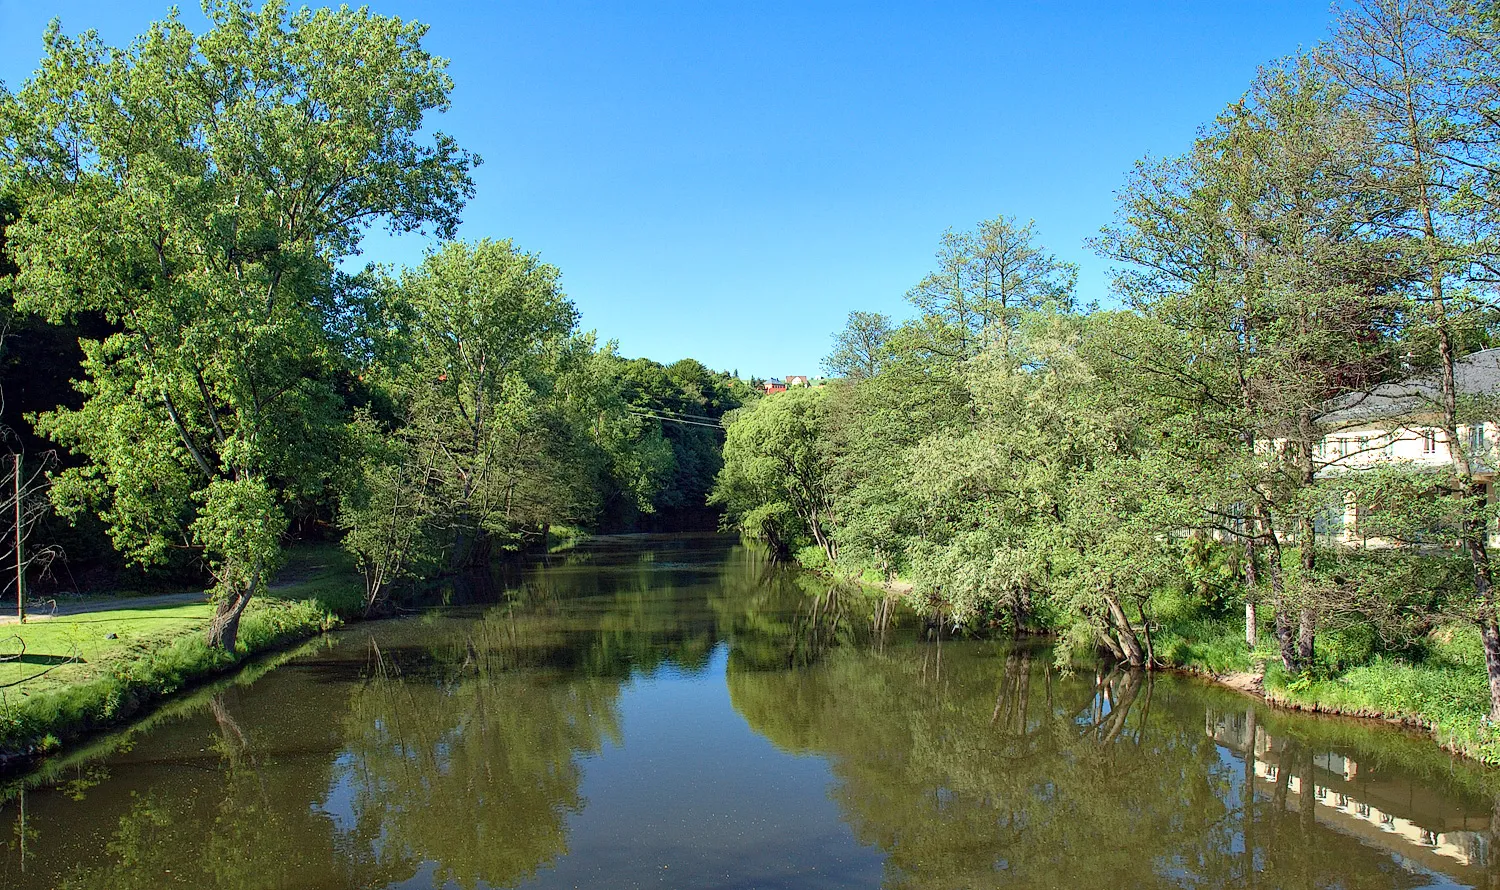 Photo showing: This image shows the river "Zwickauer Mulde" in Wilkau-Haßlau (Saxony, Germany).